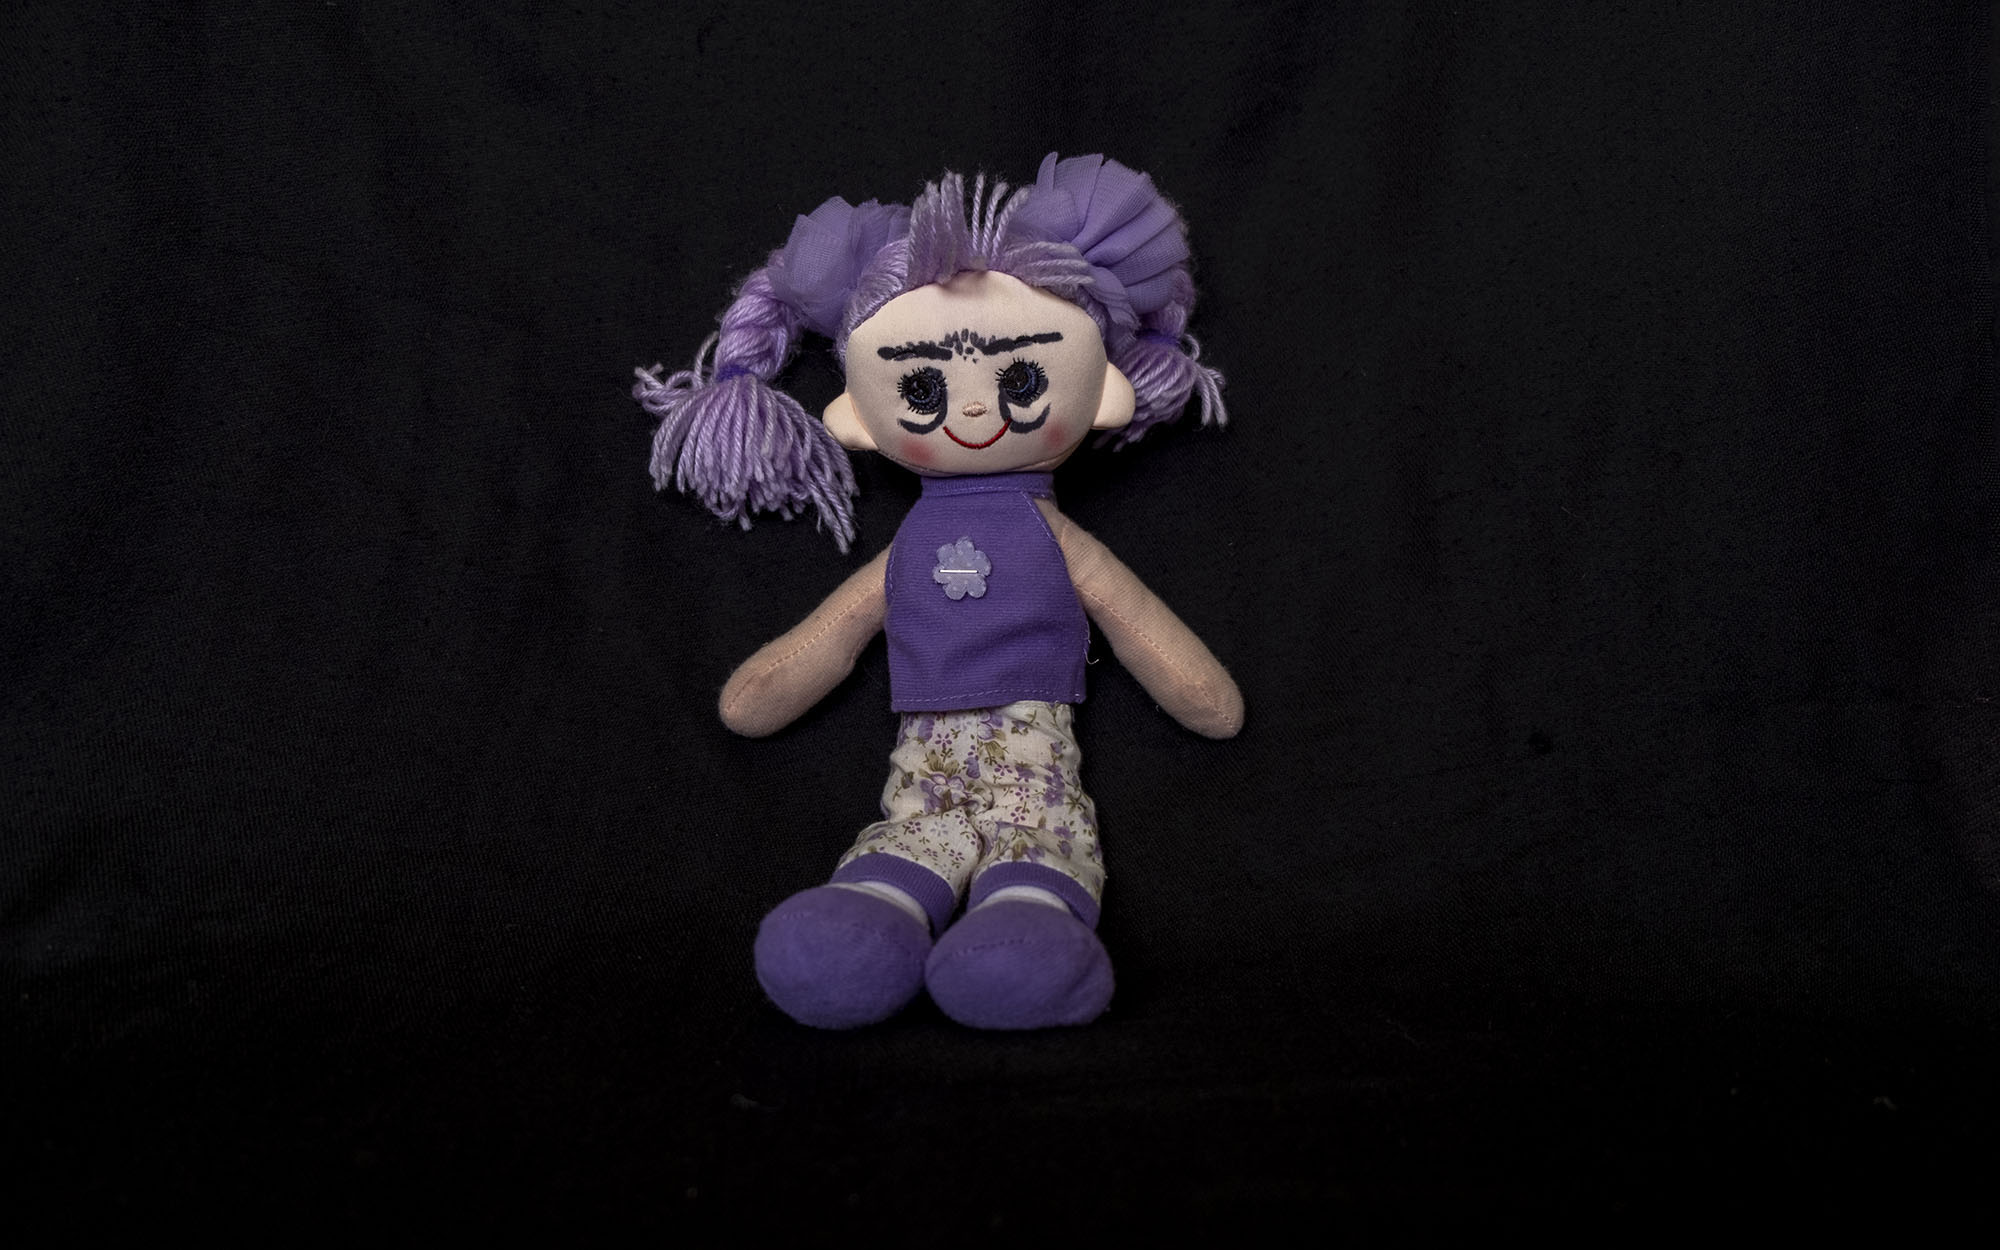 Smiling plush doll with purple hair, a purple singlet, purple shoes, and cream pants with purple flowers and hem